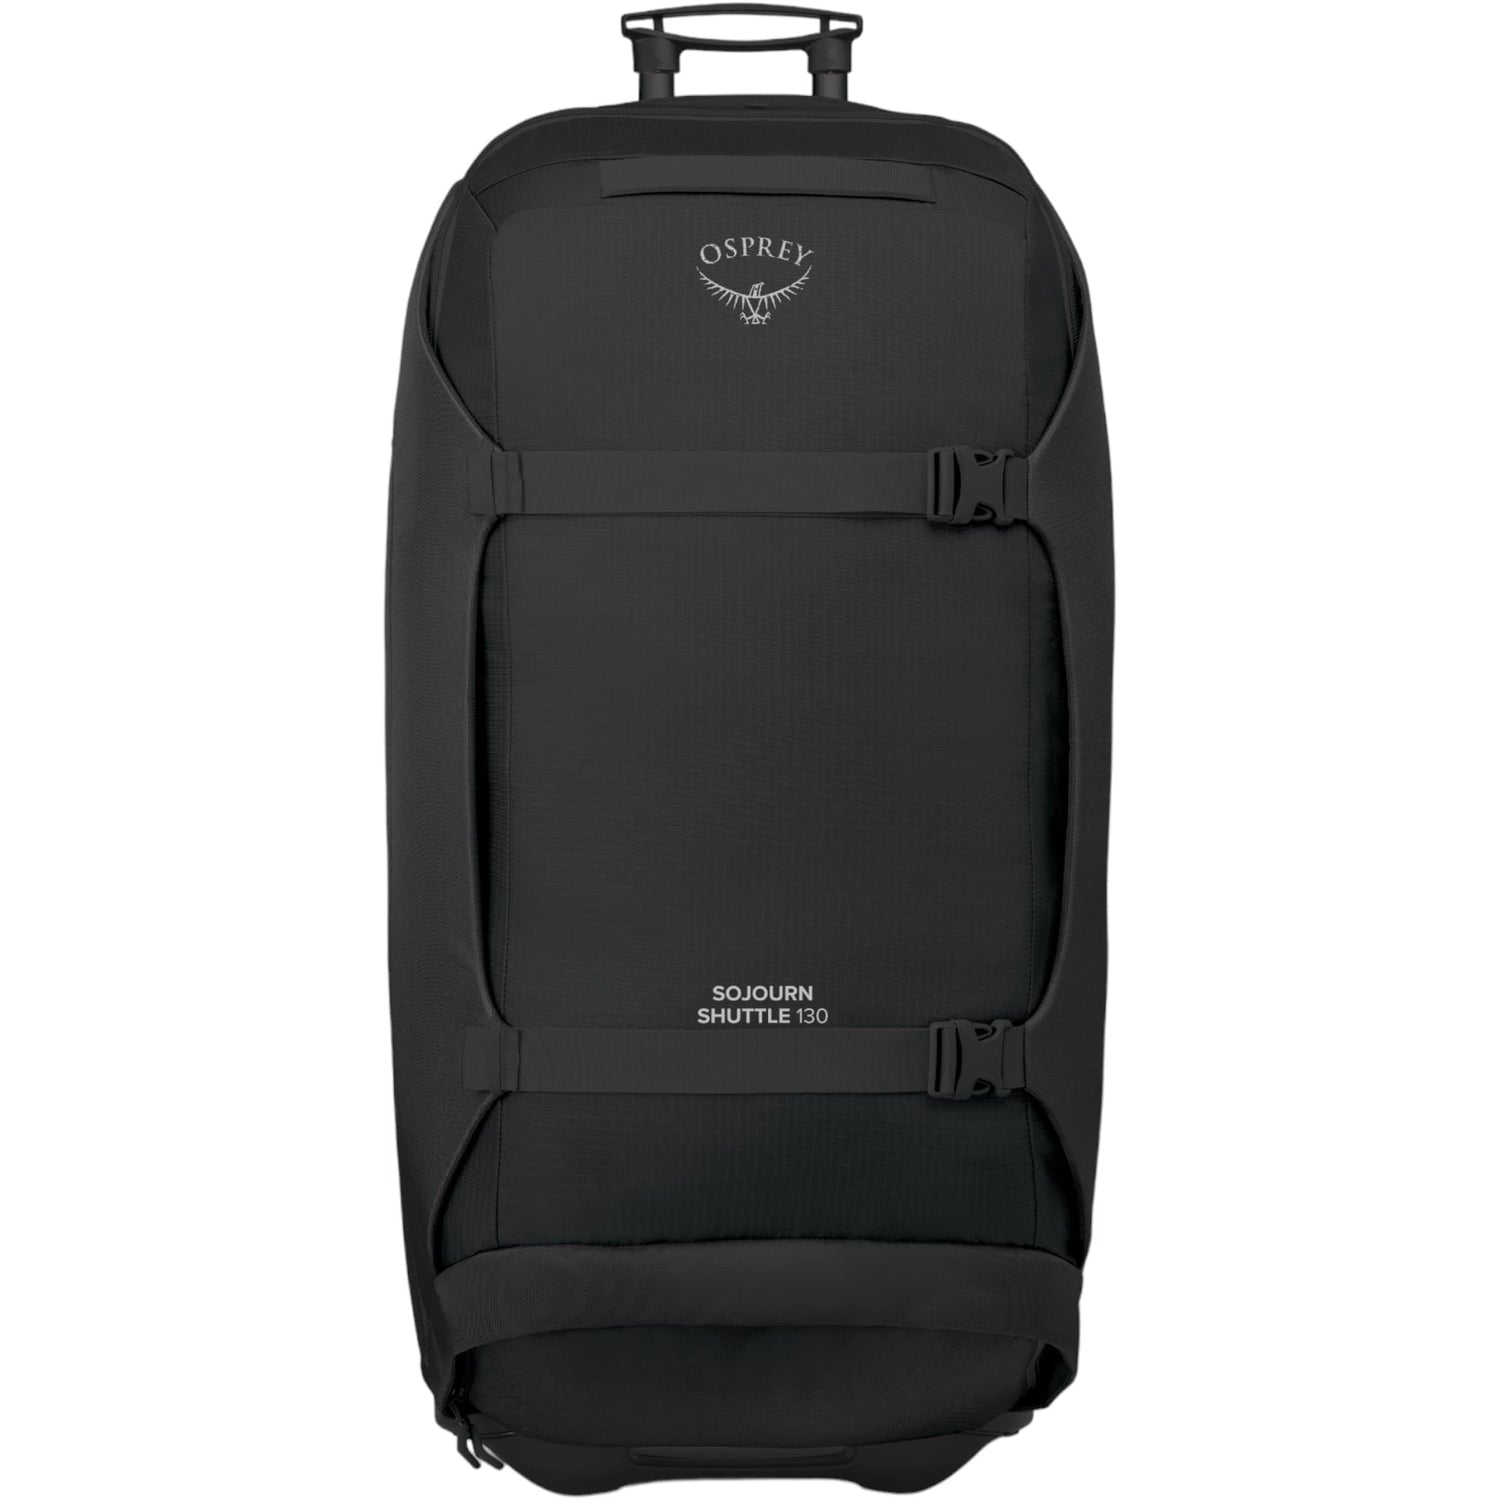 Sojourn Shuttle Wheeled Duffel 36"/100L Suitcase